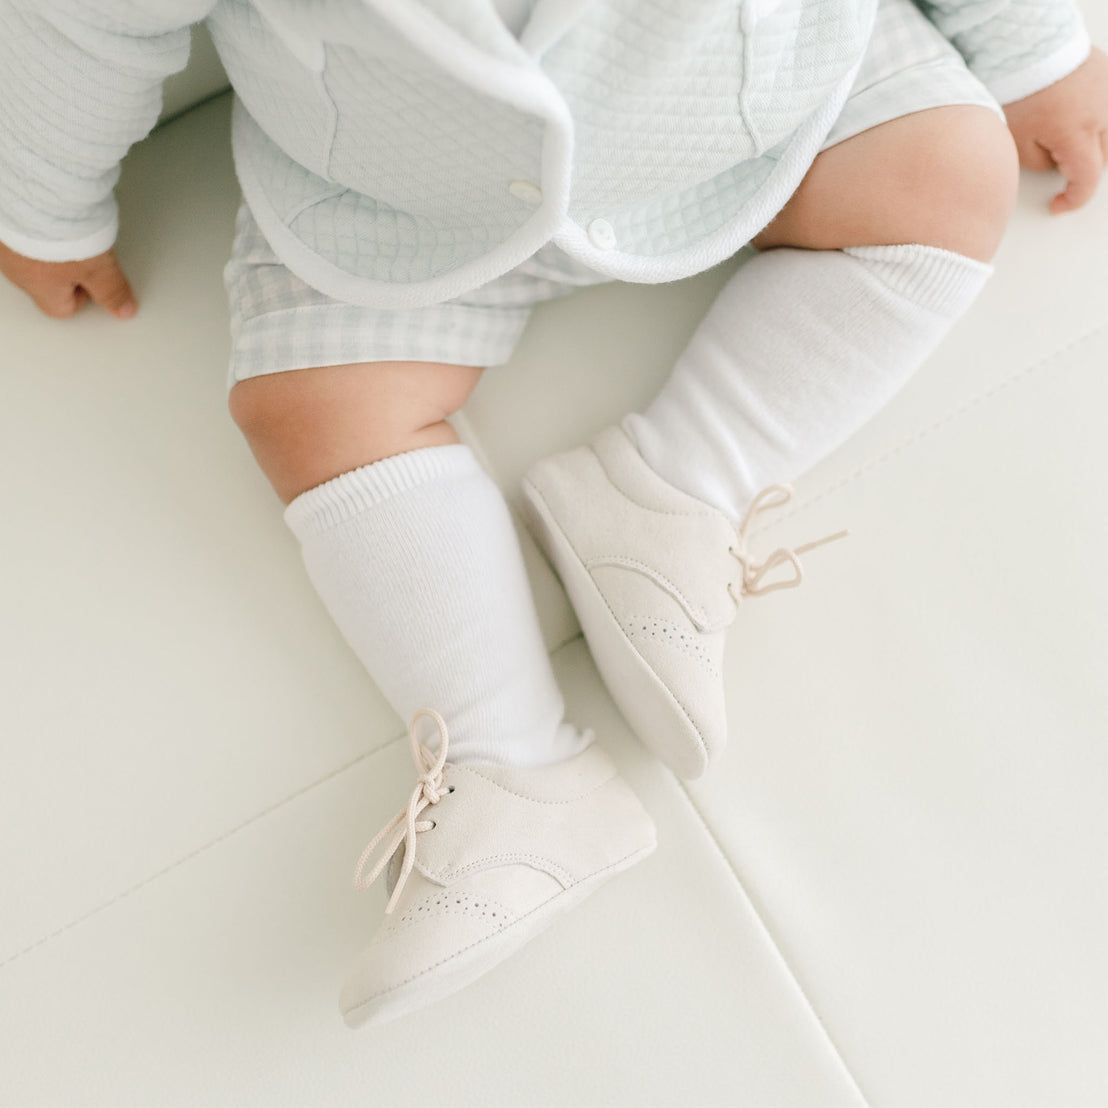 A close-up of a baby's legs dressed in a designer pale blue quilted onesie and white socks, wearing Ian Suede Shoes, laying on a white surface.